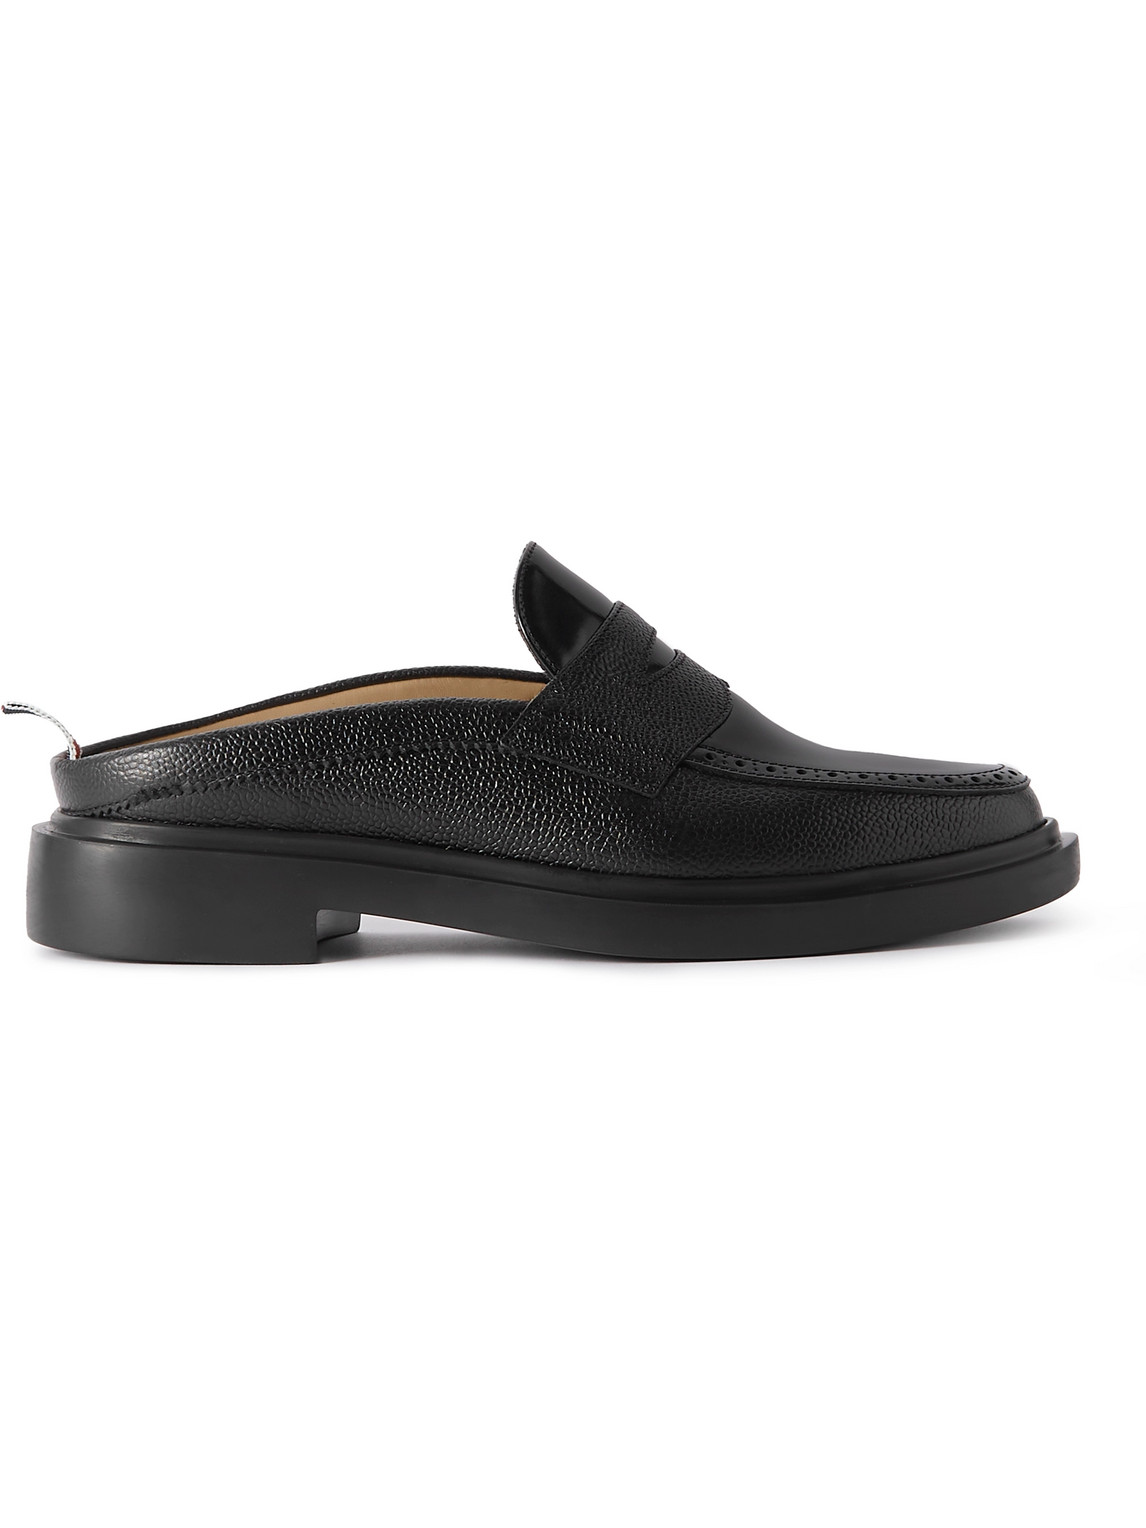 Thom Browne Full-Grain Leather Backless Penny Loafers